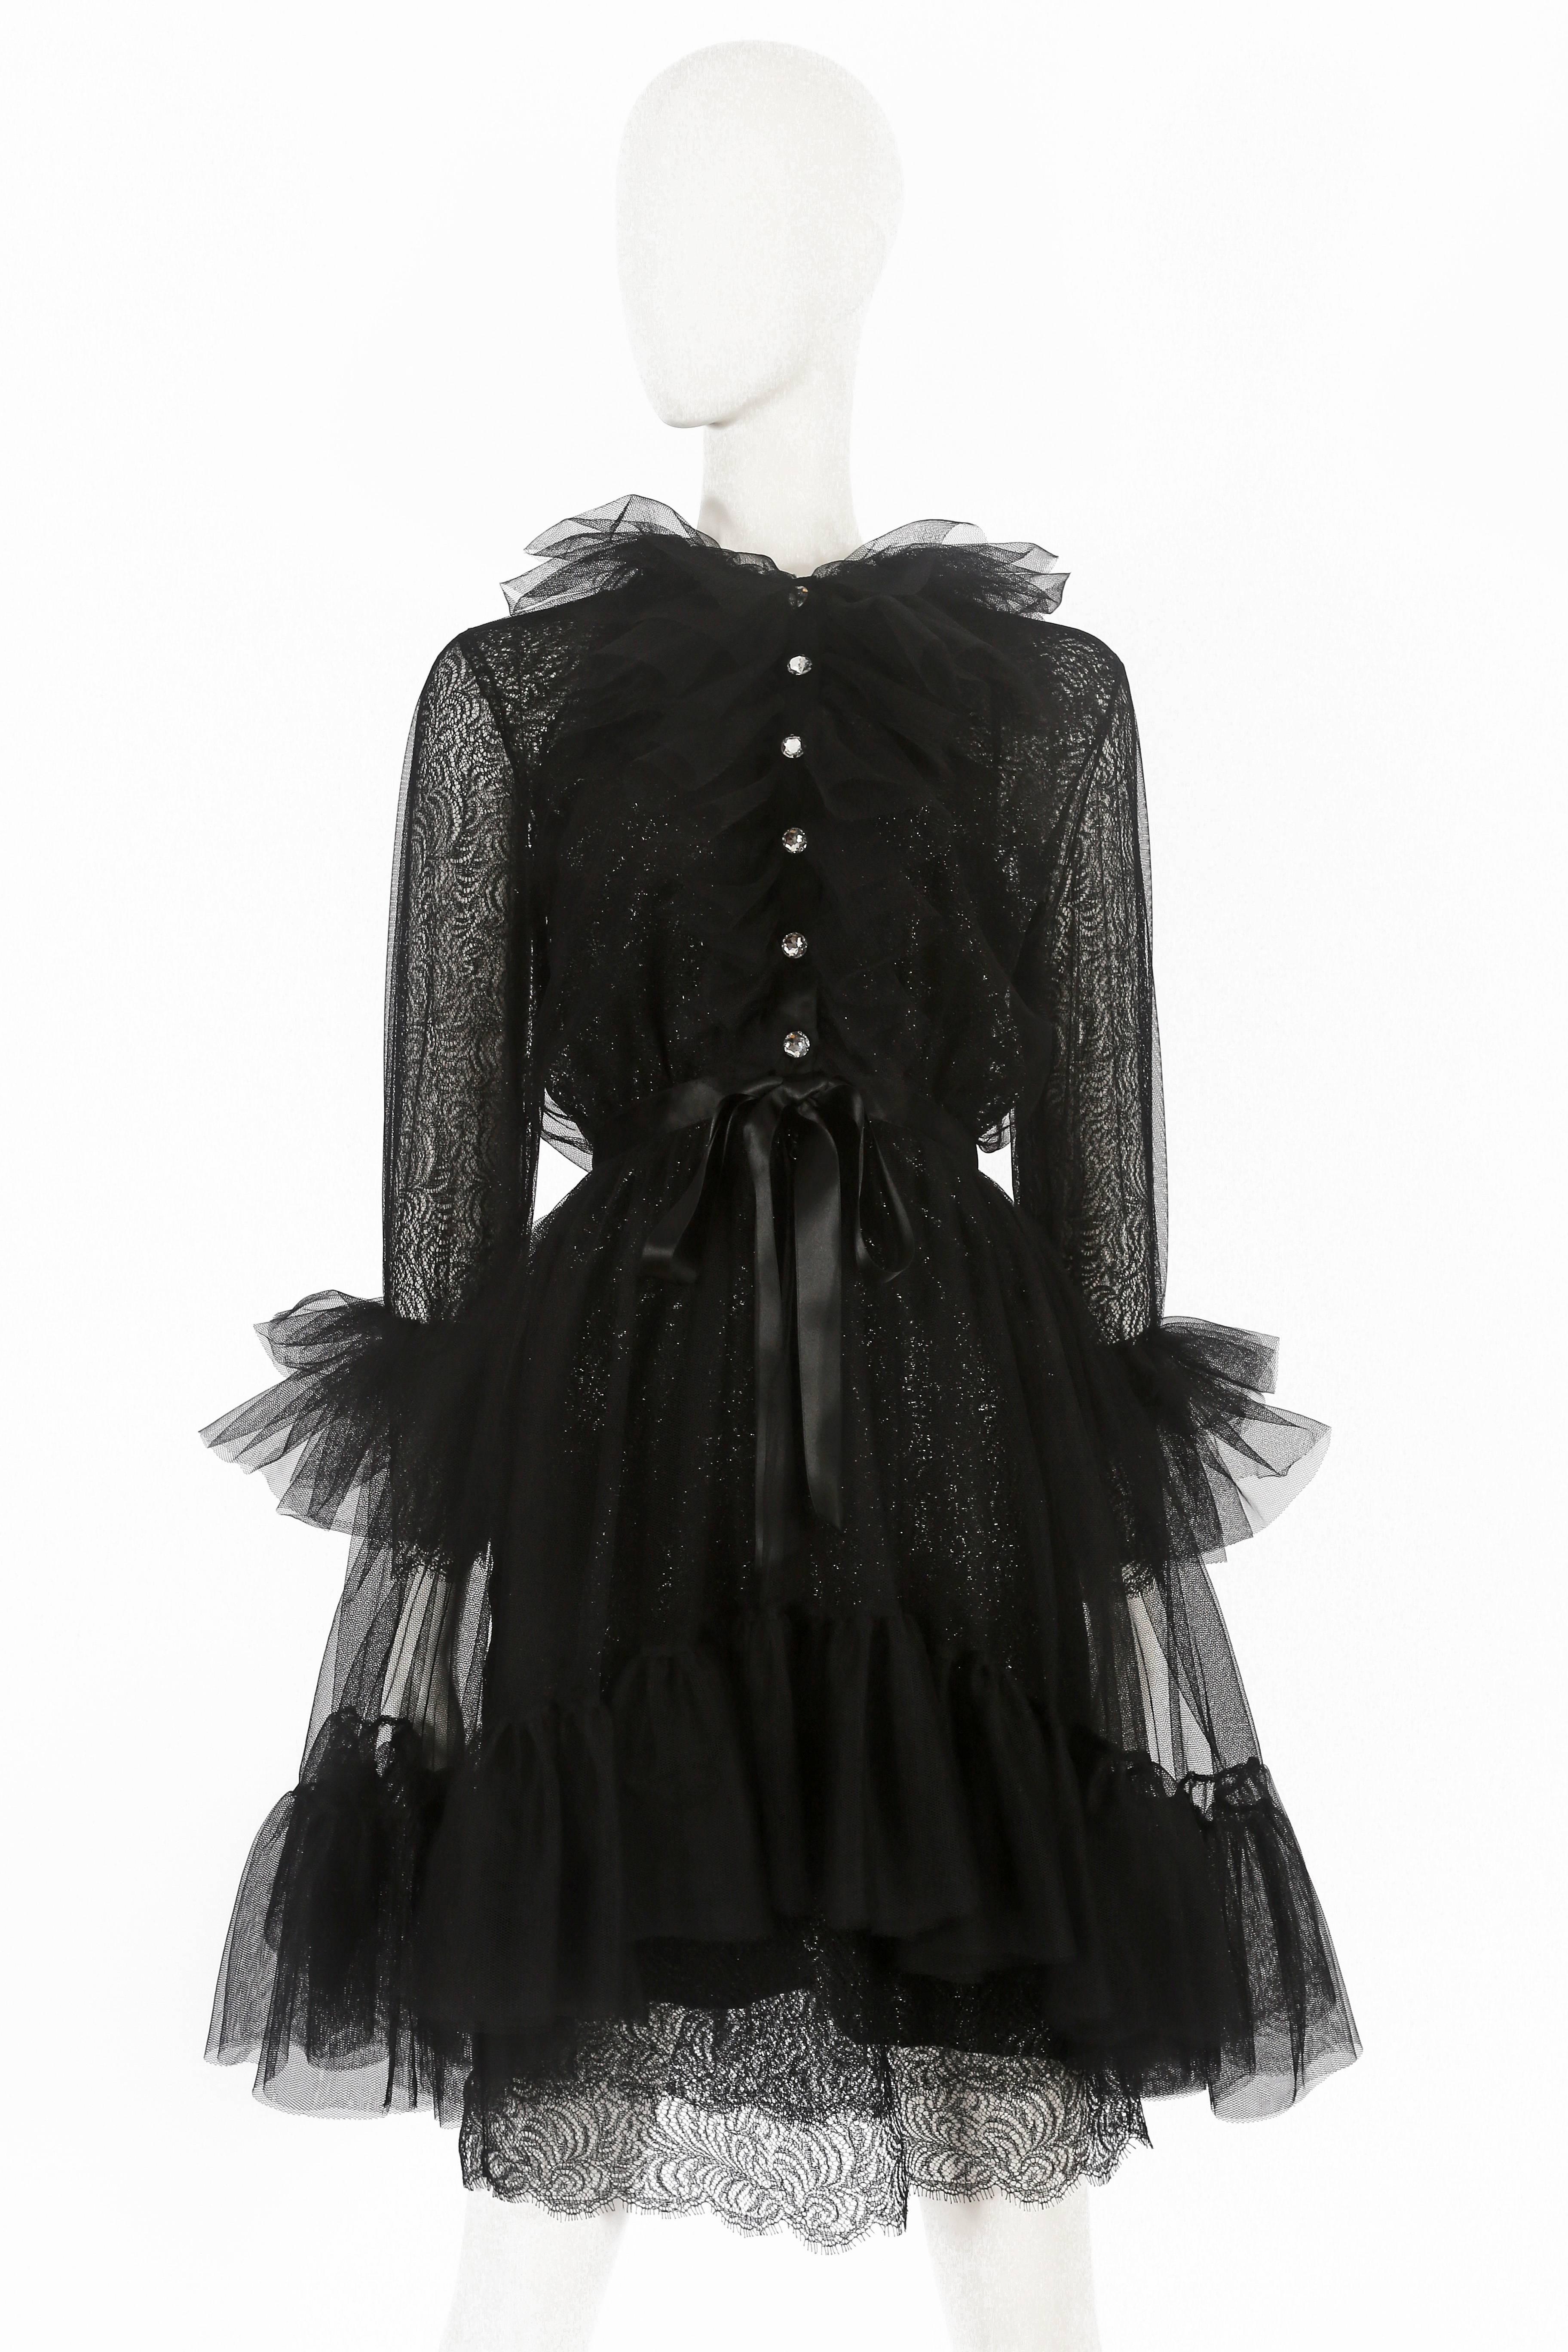 Women's or Men's Yves Saint Laurent tulle and lace cocktail dress, circa 1980